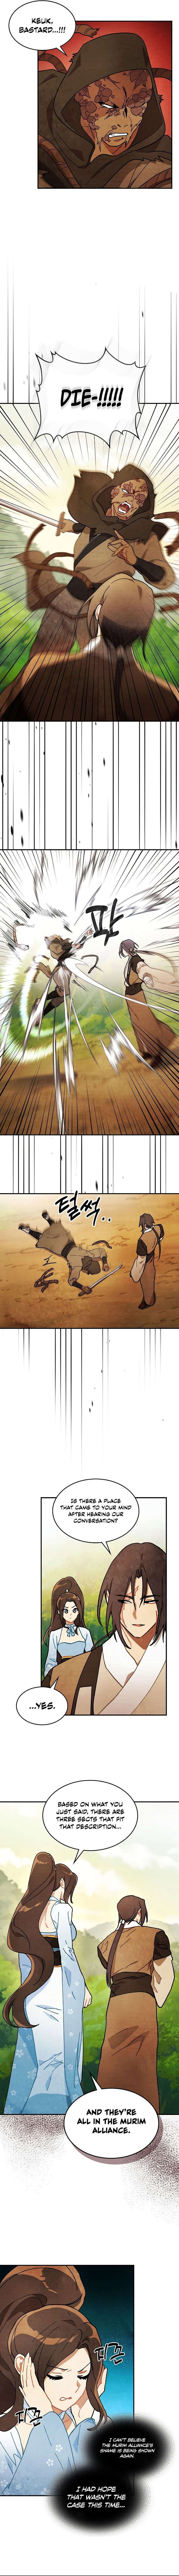 chronicles-of-the-martial-gods-return-chap-33-7